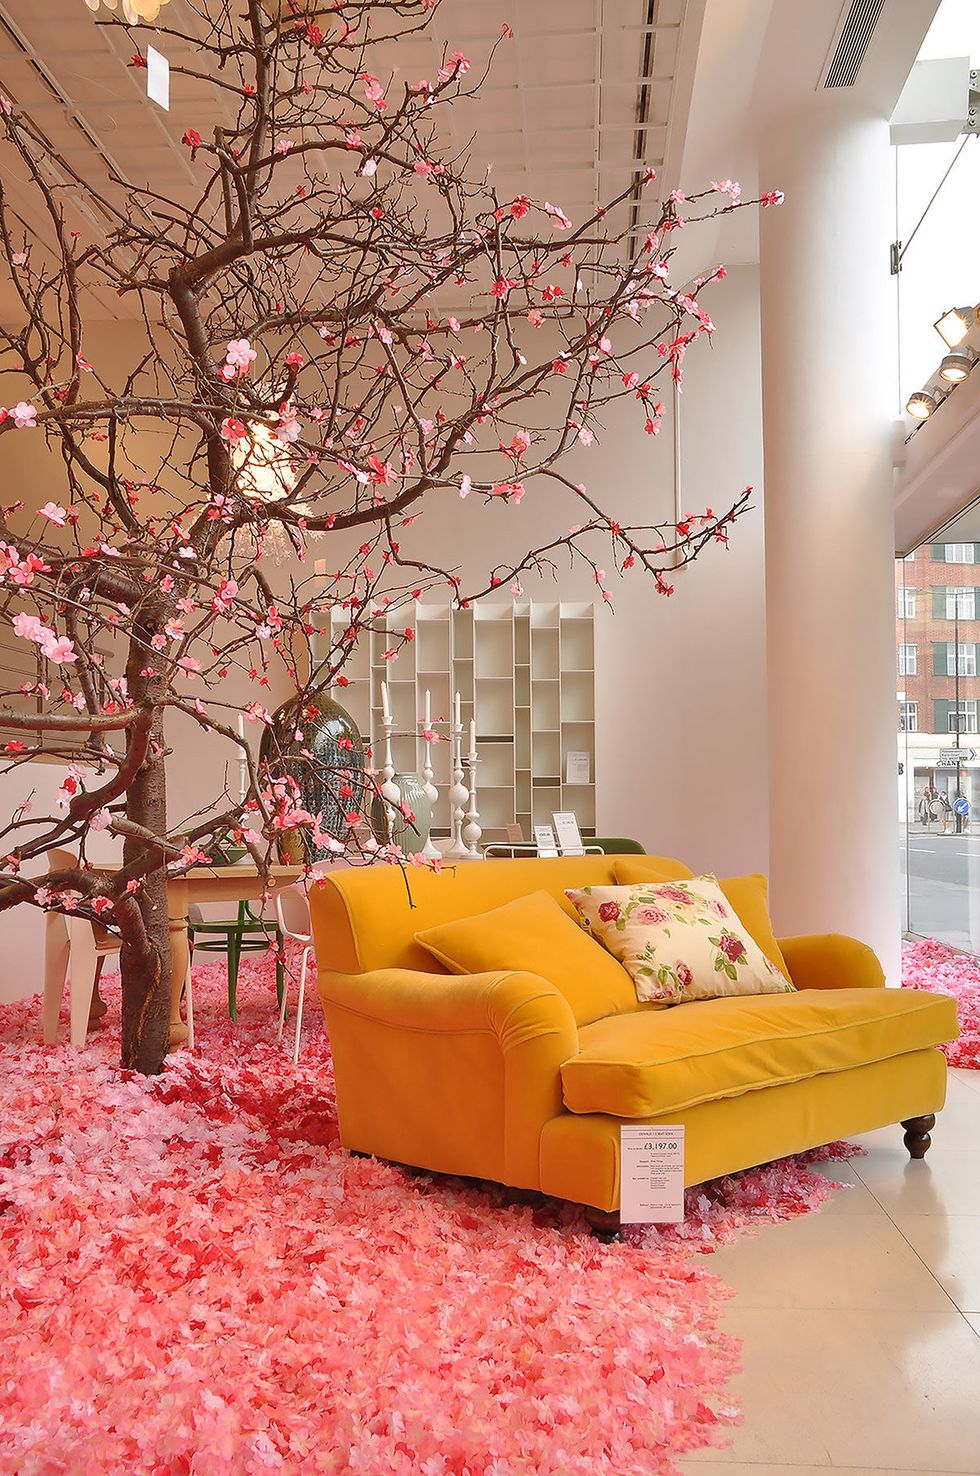 Branch, Twig, Room, Interior design, Red, Pink, Couch, Furniture, Interior design, Ceiling, 